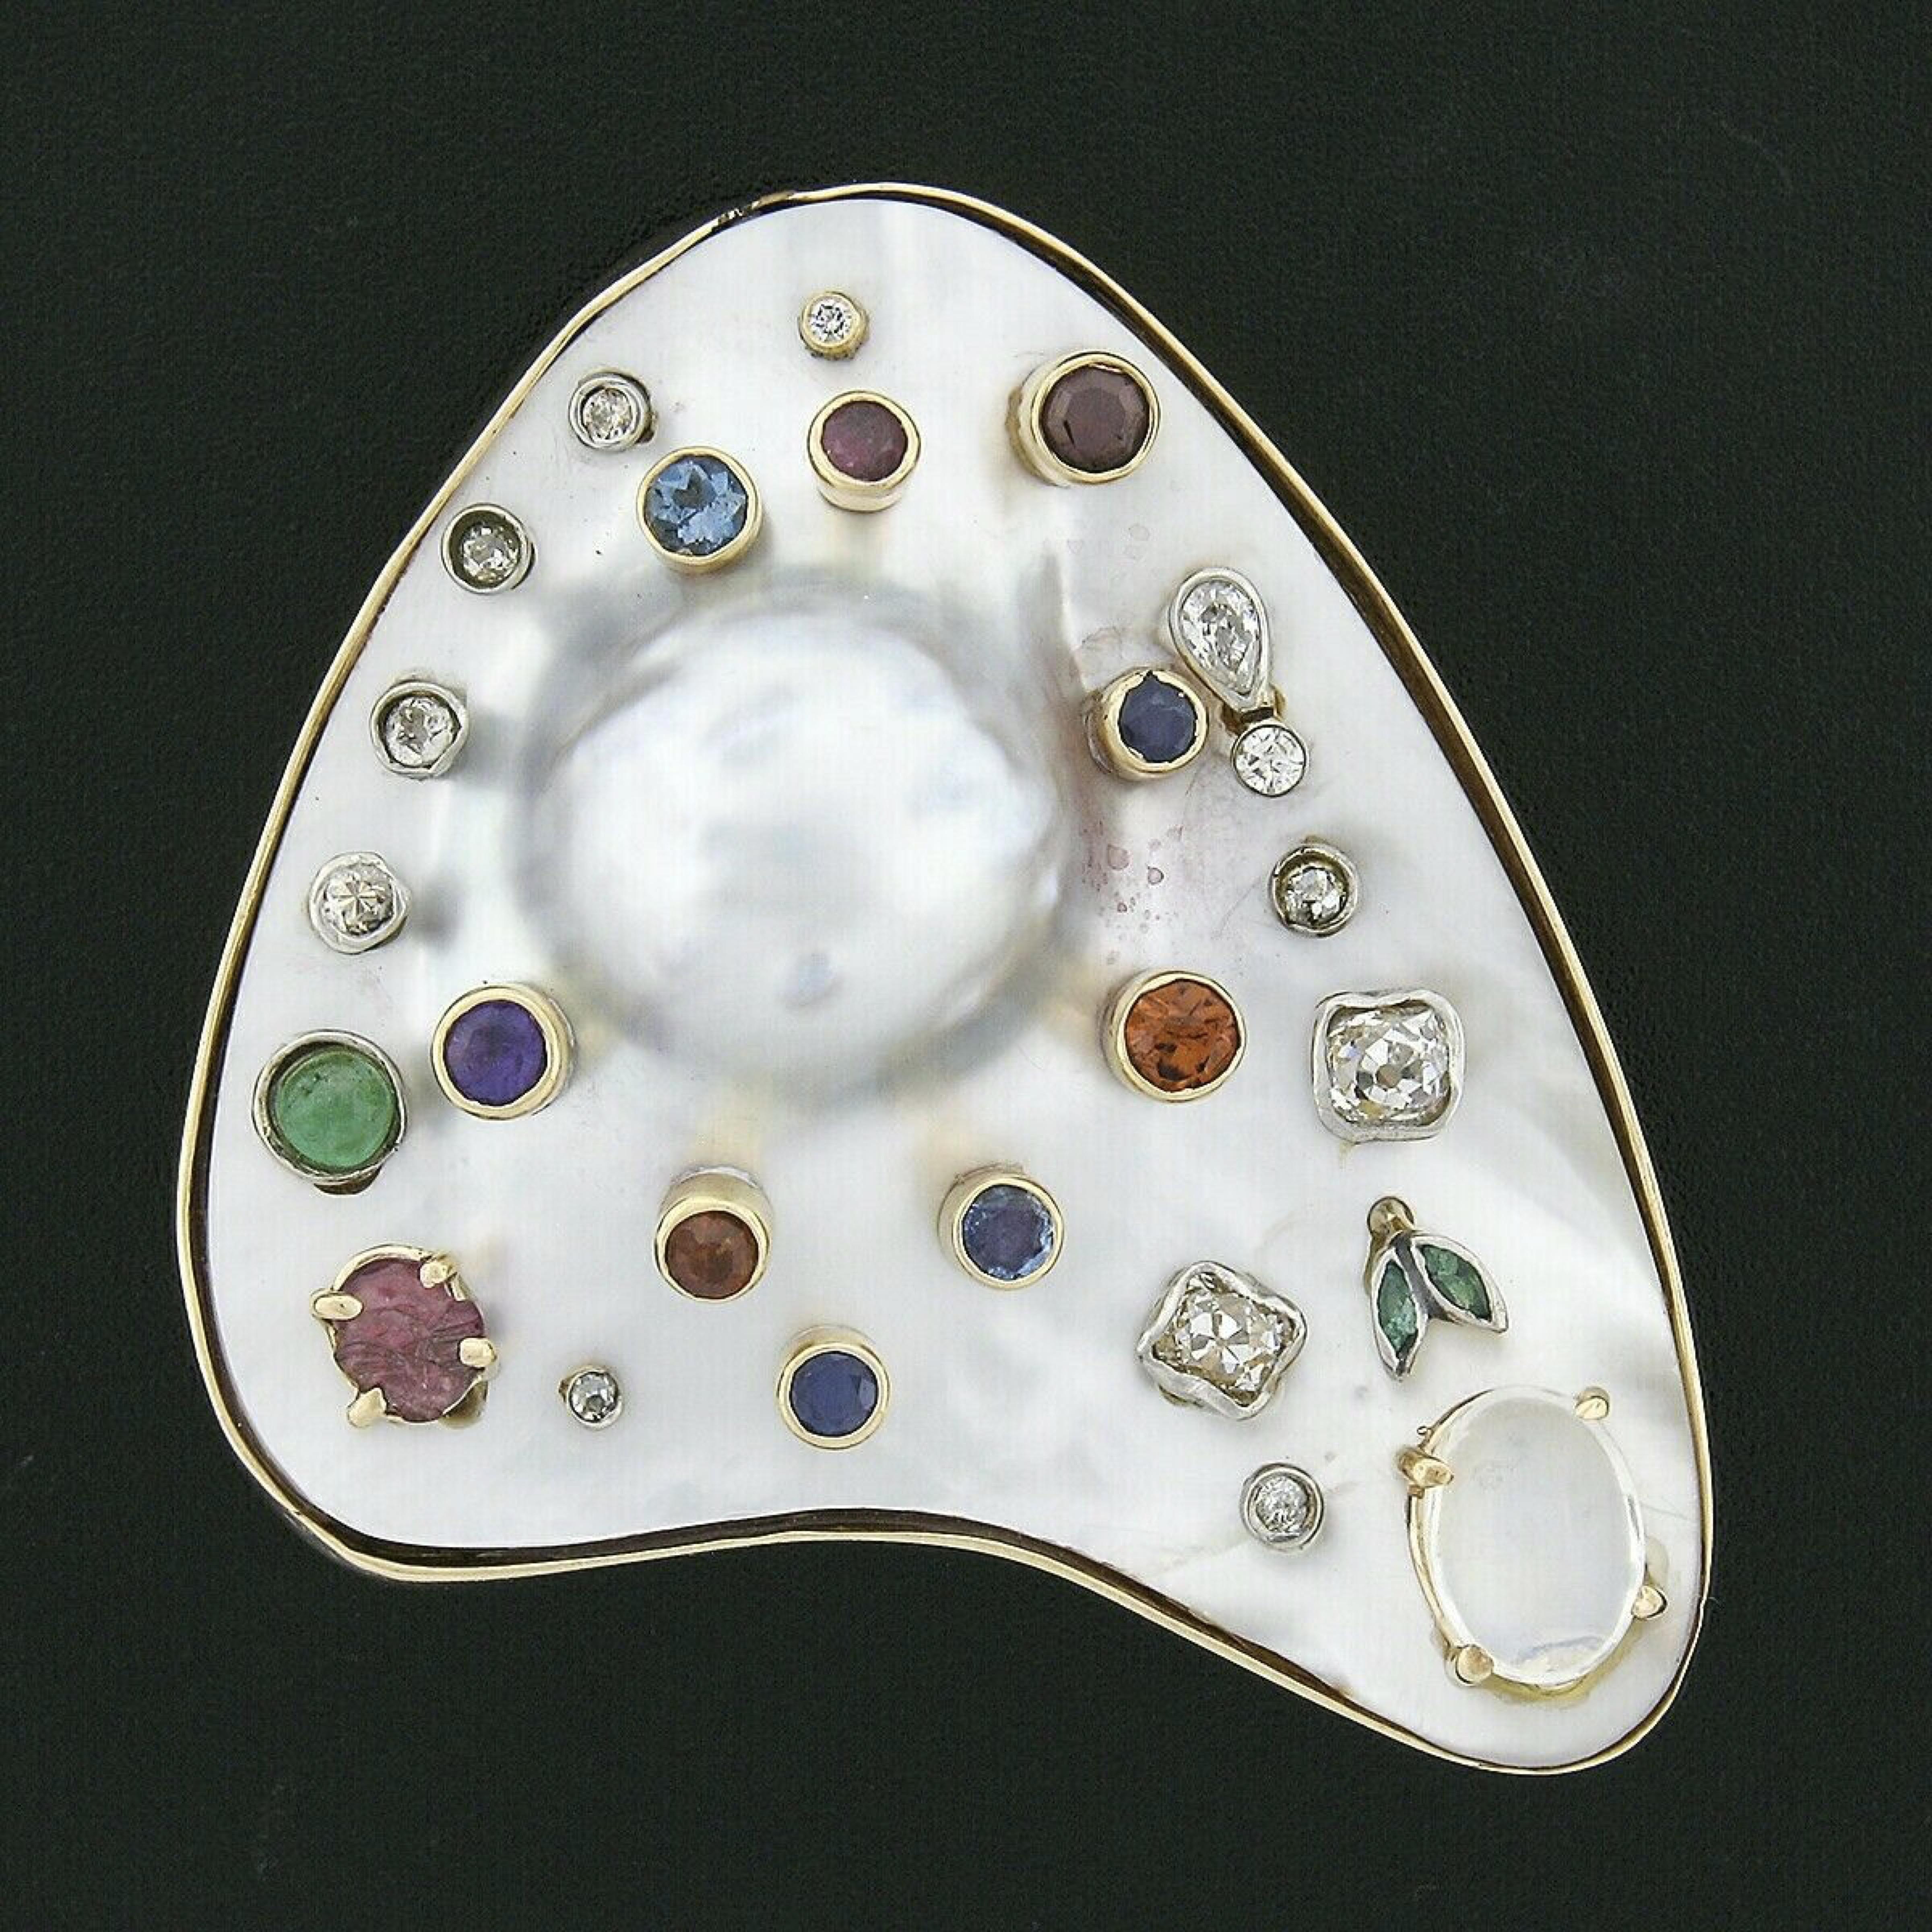 This magnificent, handmade, vintage brooch or pendant is crafted from solid 14k yellow gold. It features a unique artists pallet design constructed from a large baroque pearl in which is set with fine quality diamonds and natural gemstones accents